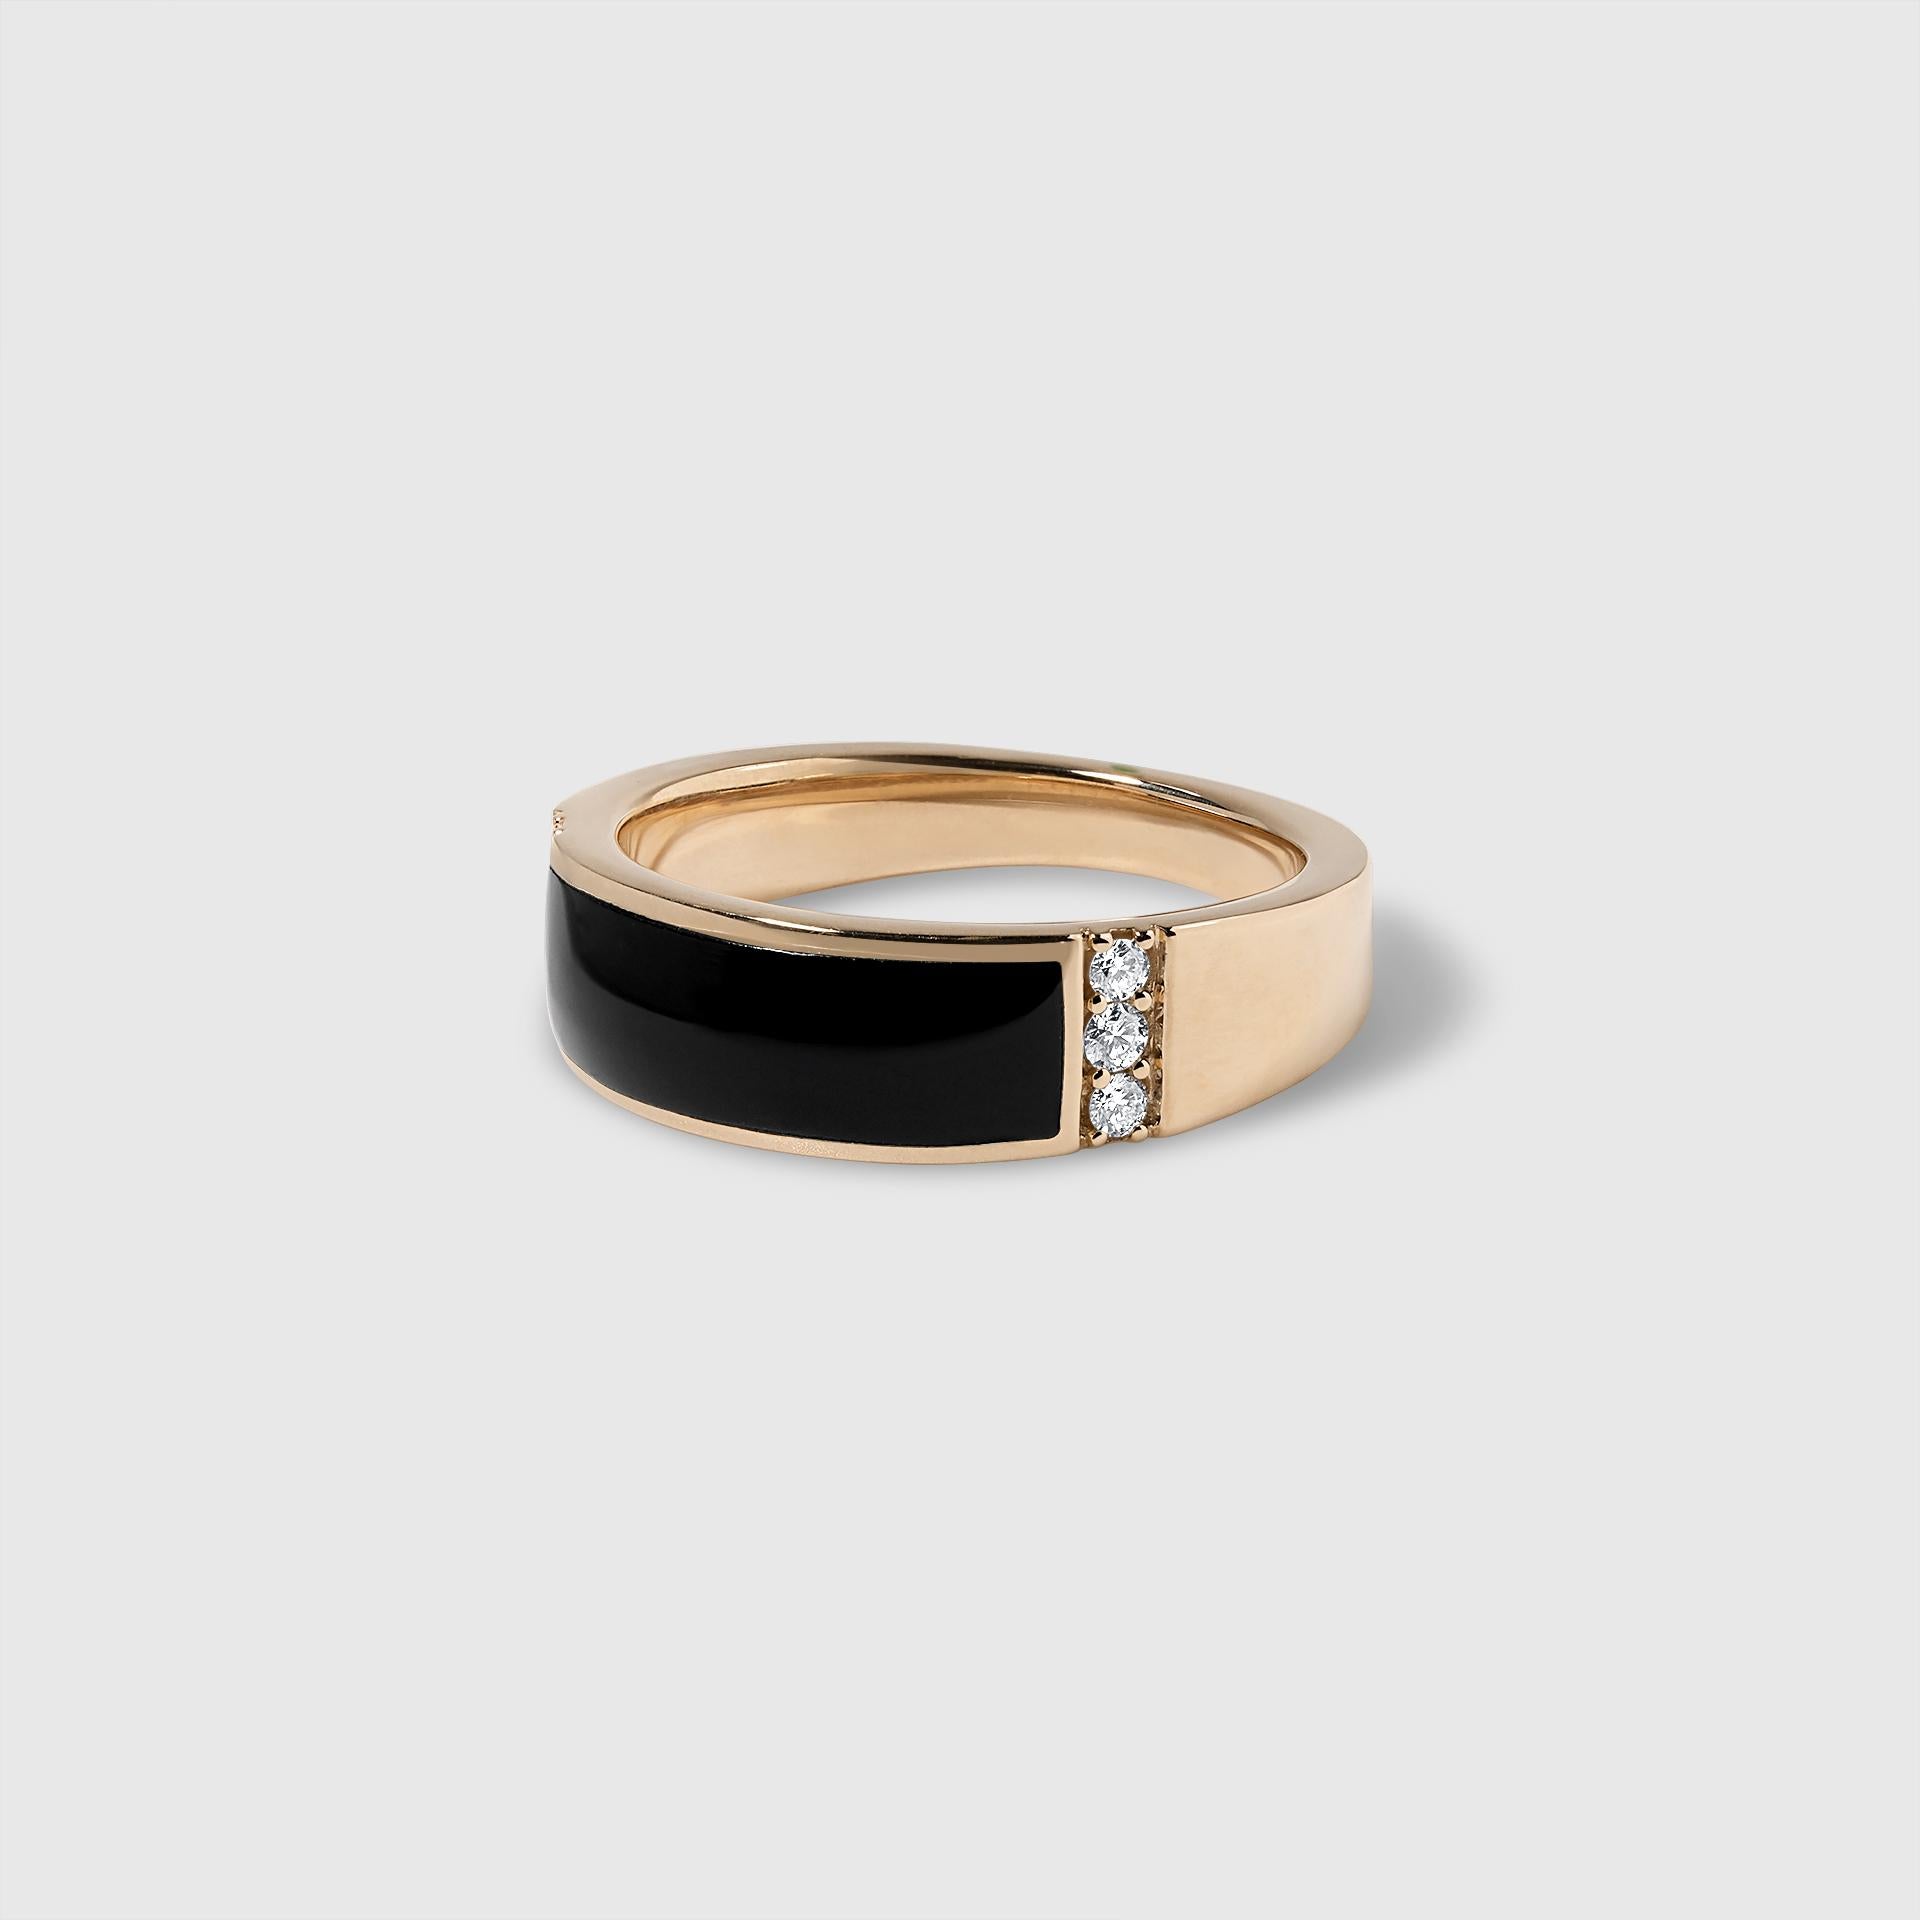 Men or Women's Black Onyx Ring with Side Diamonds, 14kt Yellow Gold by Kabana Fine Jewelry

Men's or Women's Black Onyx Ring with Side Diamonds - Custom sizes are available. Production and delivery take approximately 4-6 weeks.

All designs may be